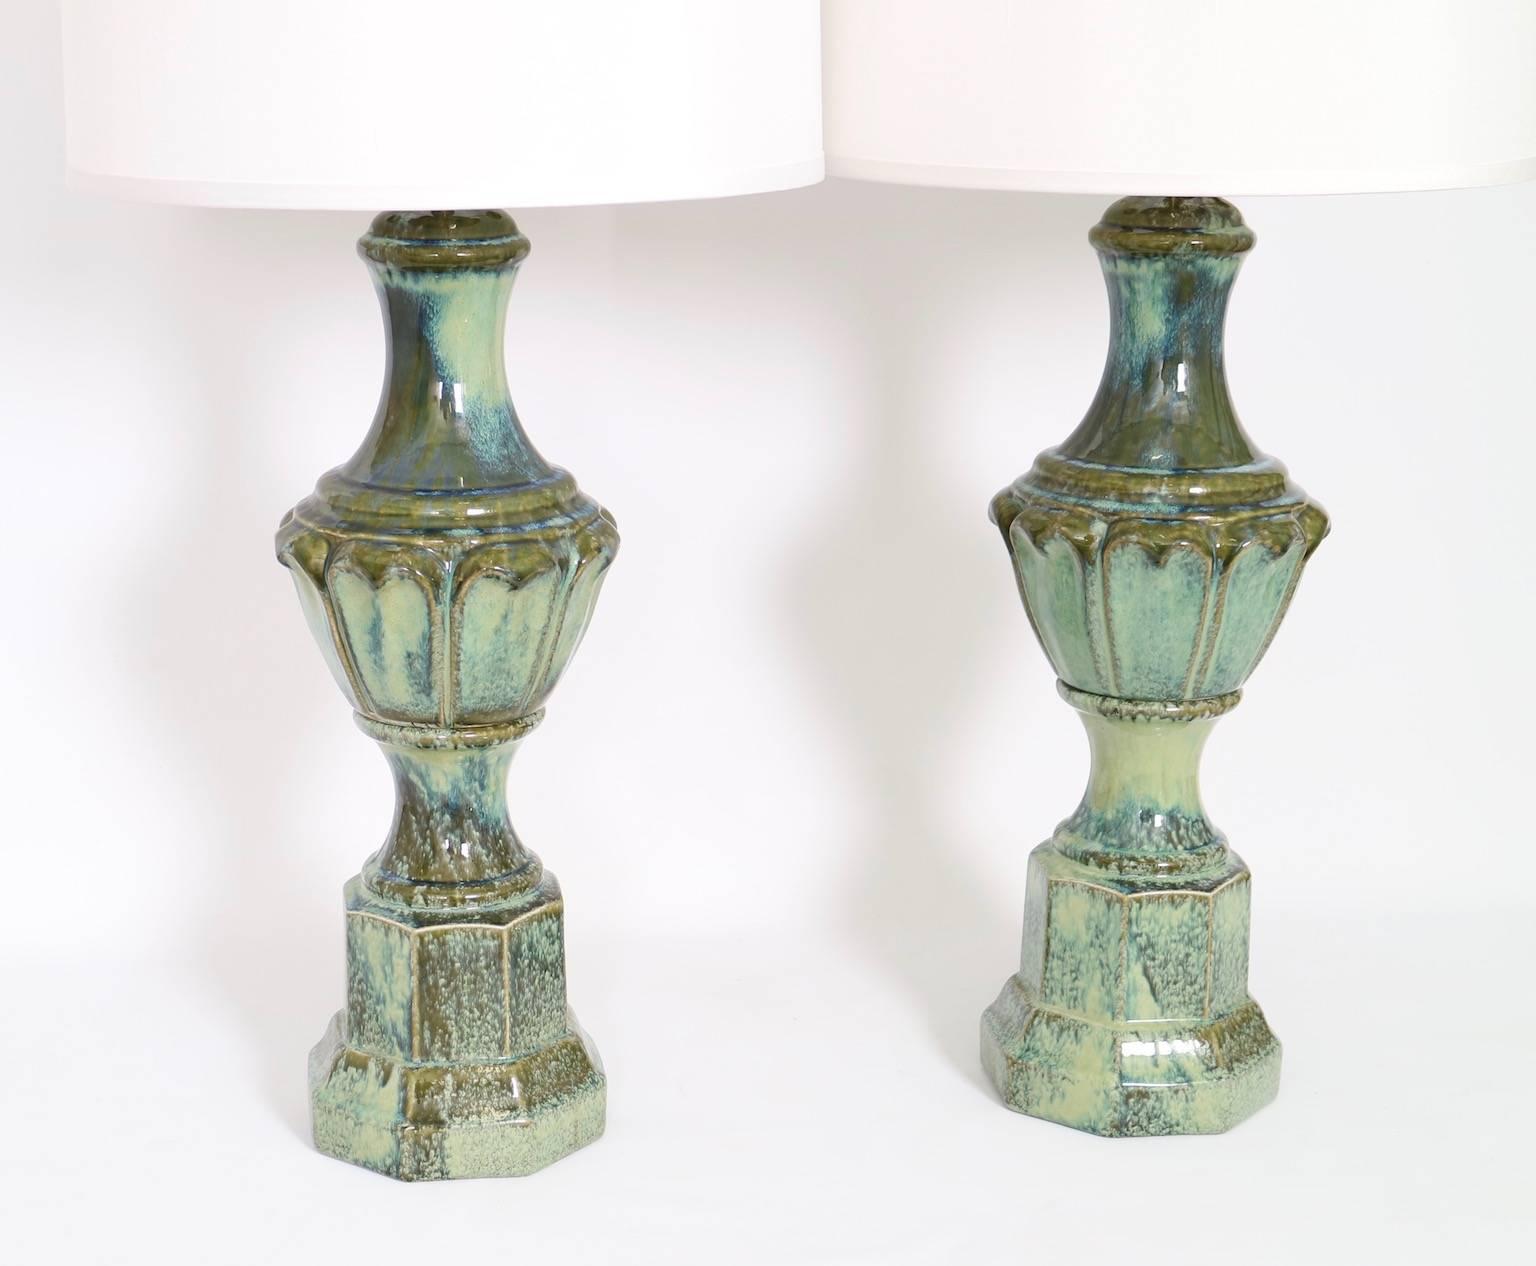 Pair of Mid-Century era American Hollywood Regency table lamps, produced circa 1950s, of classical baluster form in aqua-green glazed Majolica style porcelain. The noted height is to the finial, the height to the top of the body is 23.5 in (60 cm).